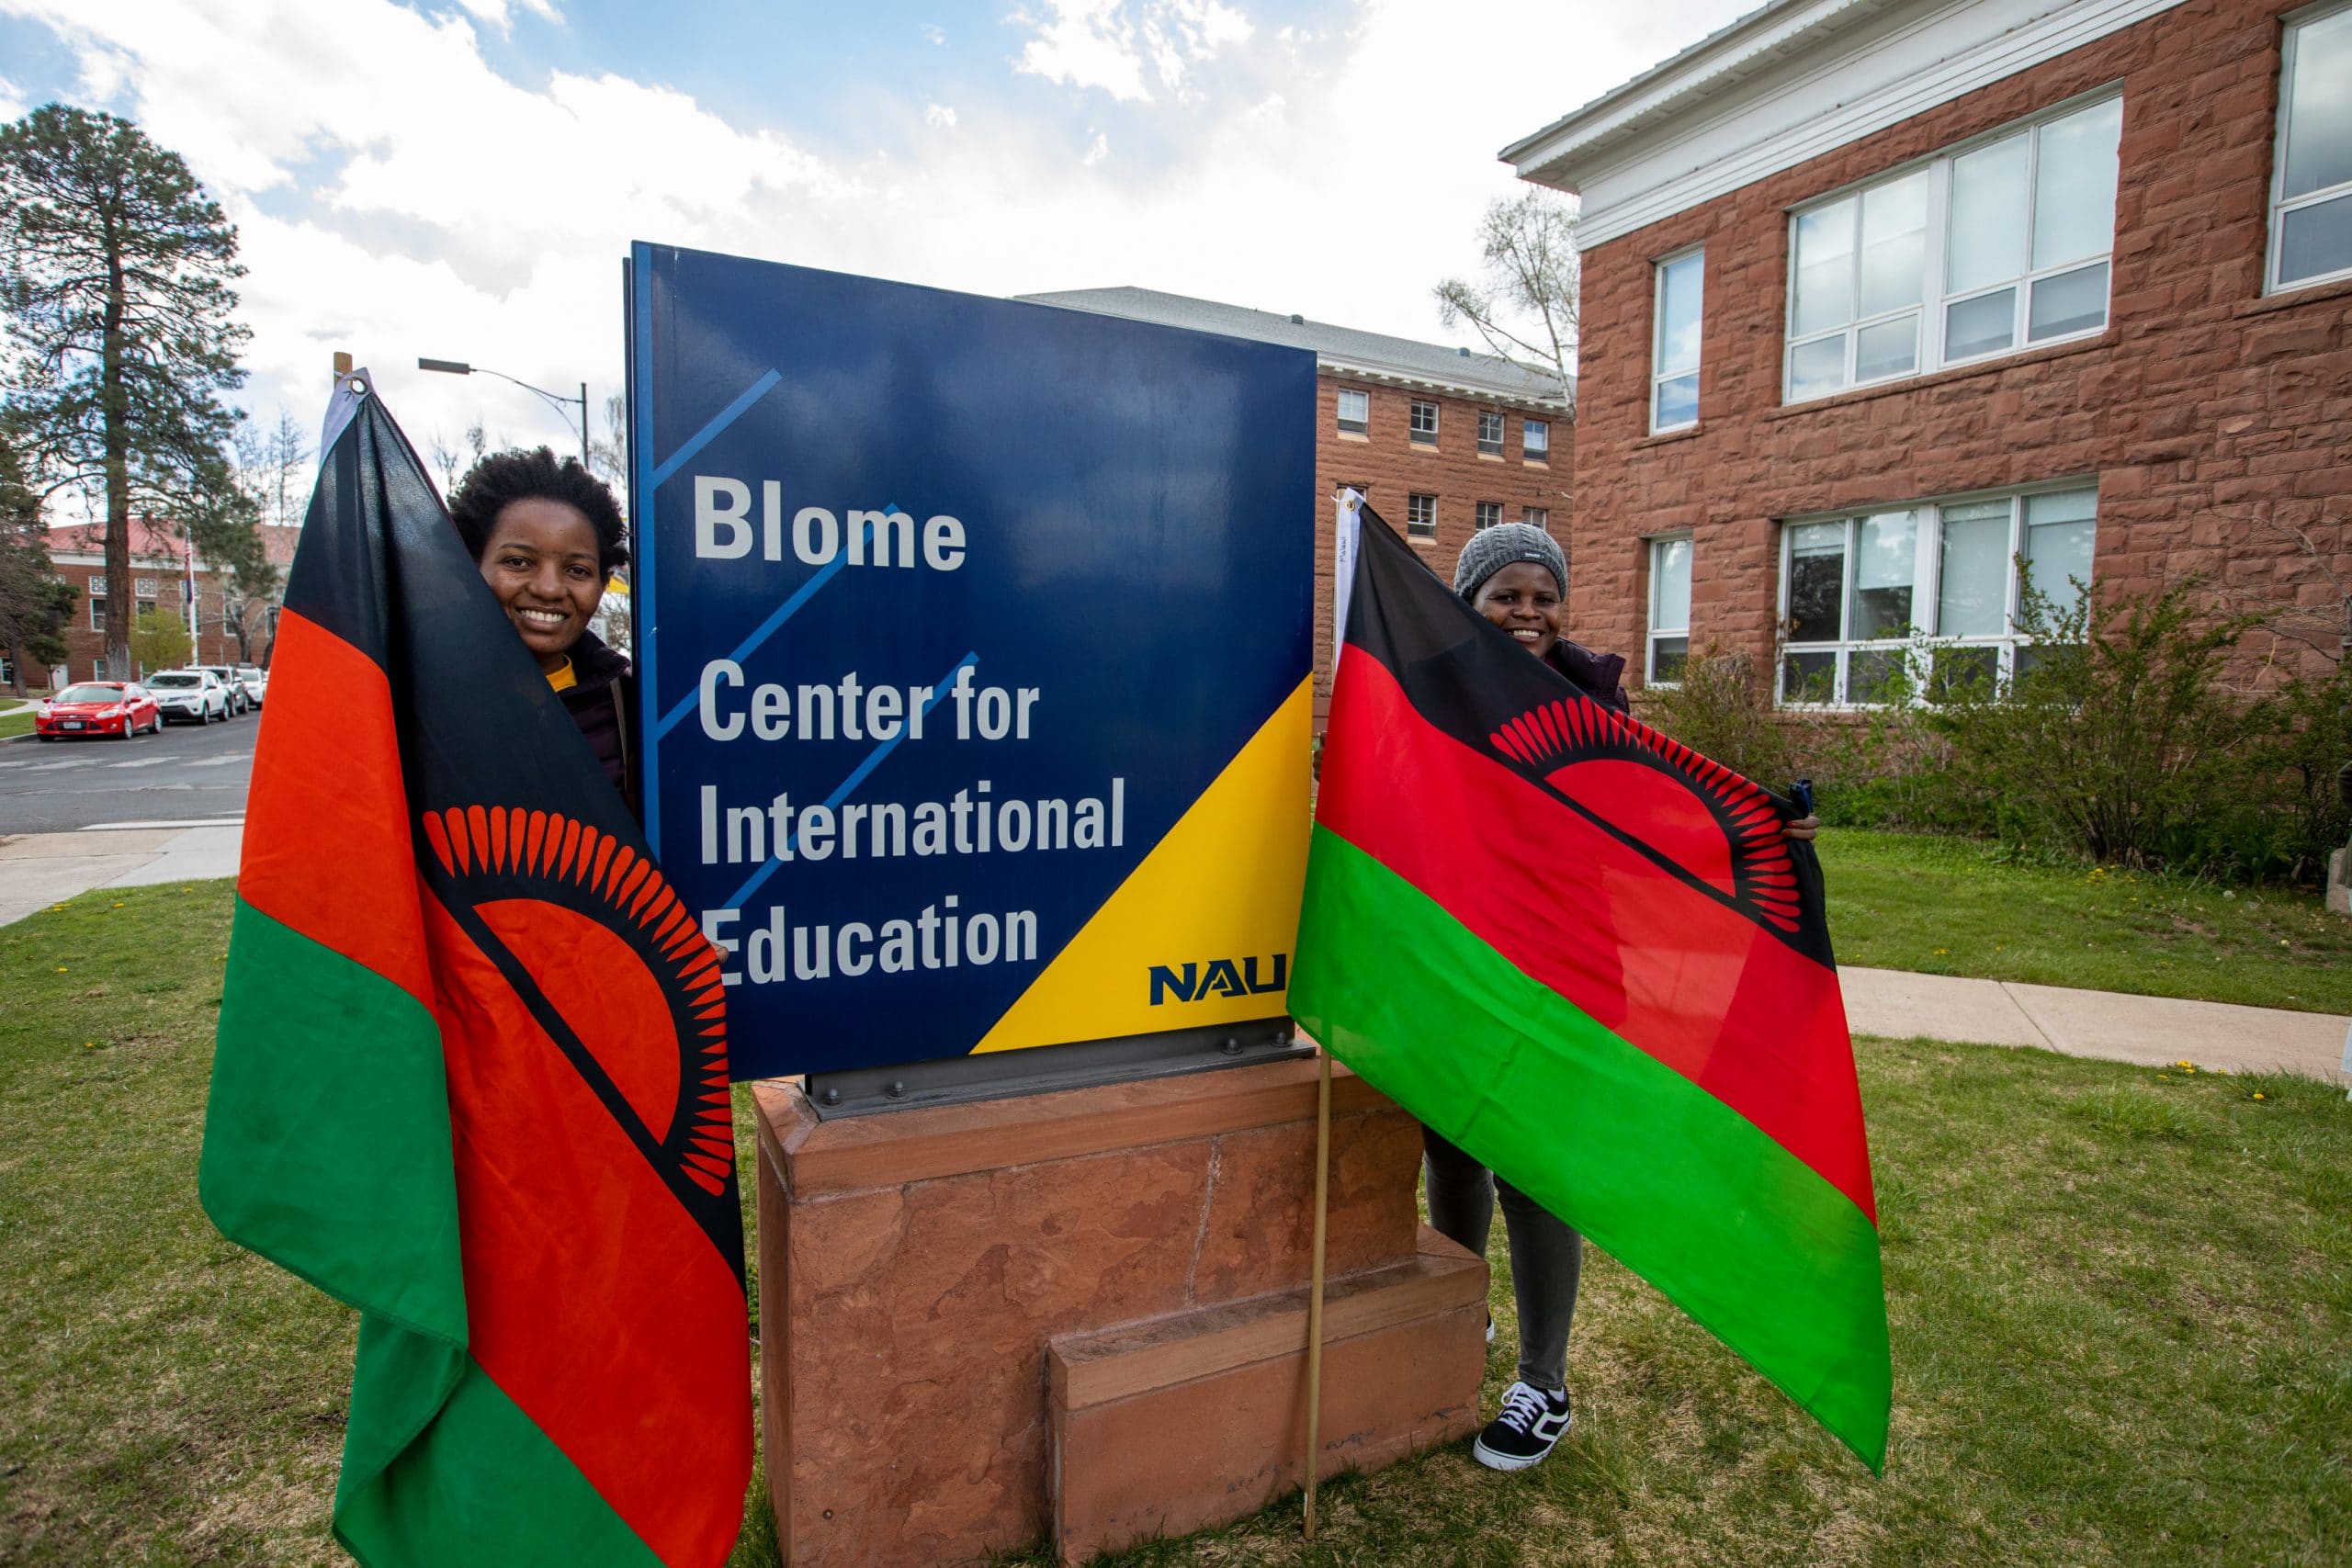 International students stand with flags outside the Blome Center for International Education building.